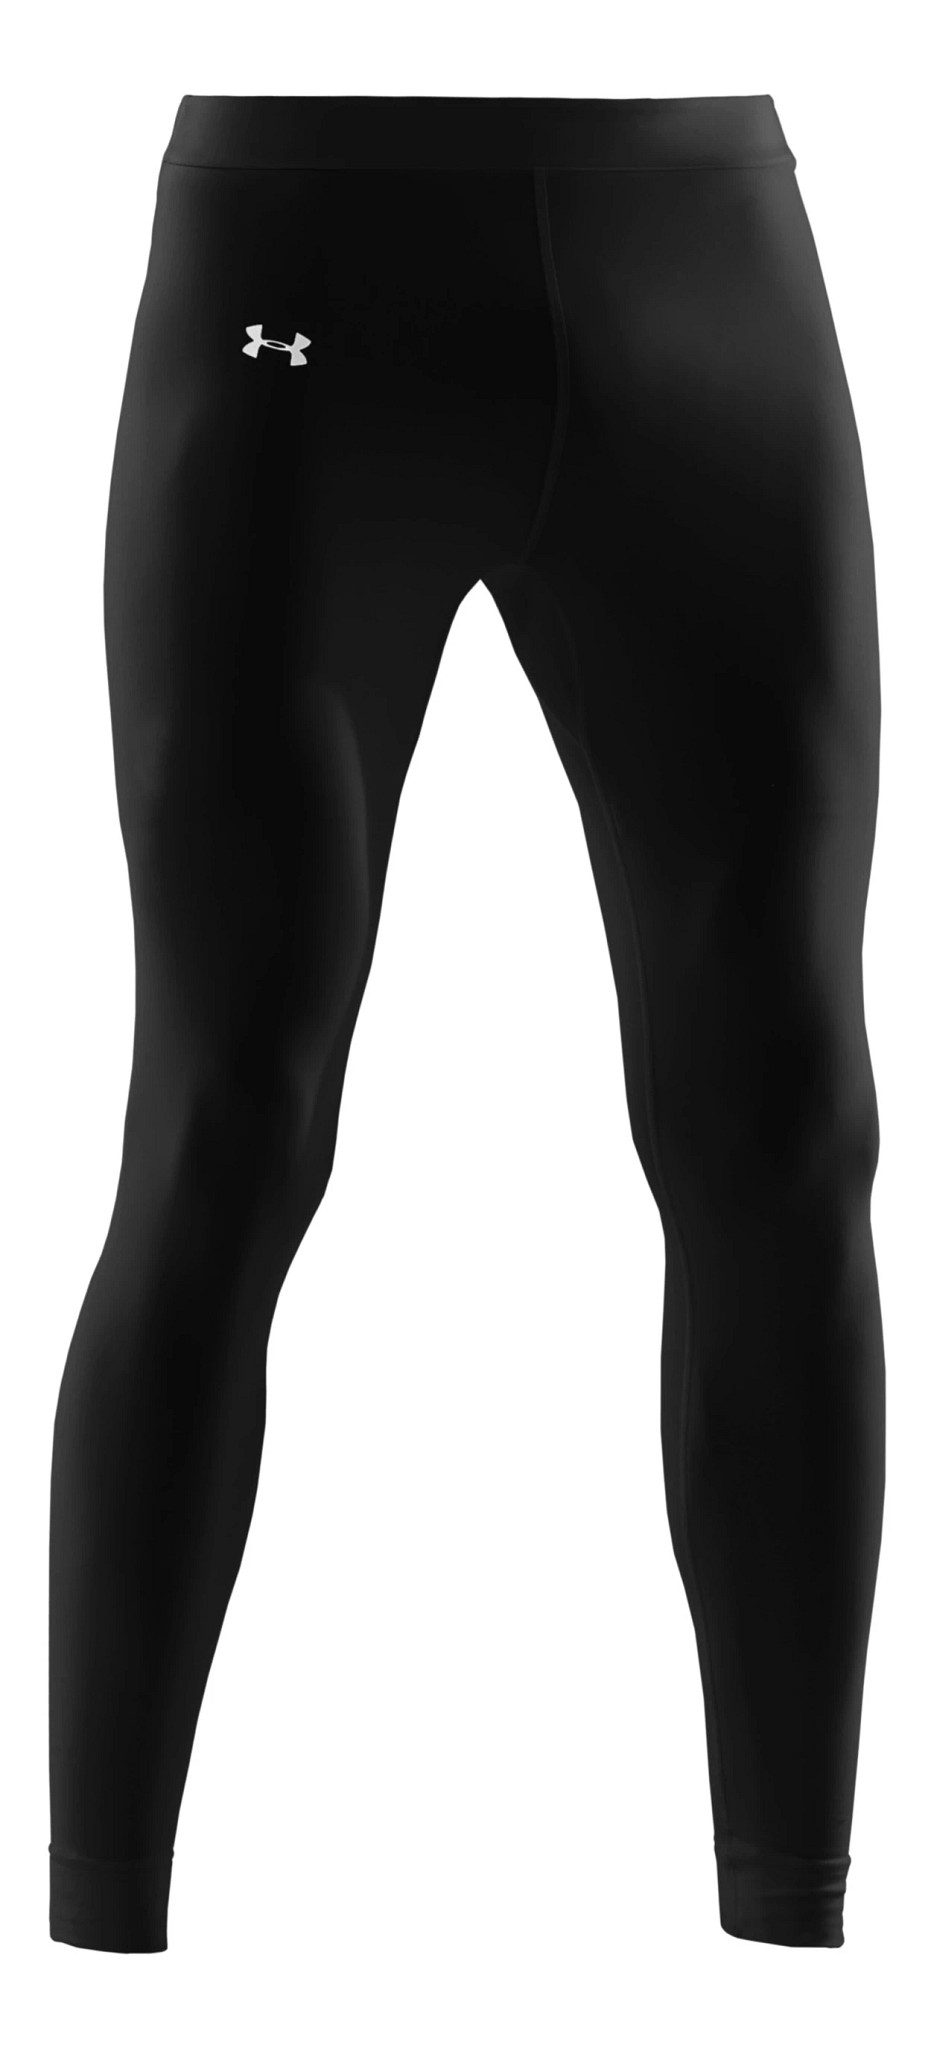 Mens Under Armour EVO Coldgear Compression Legging Fitted Tights